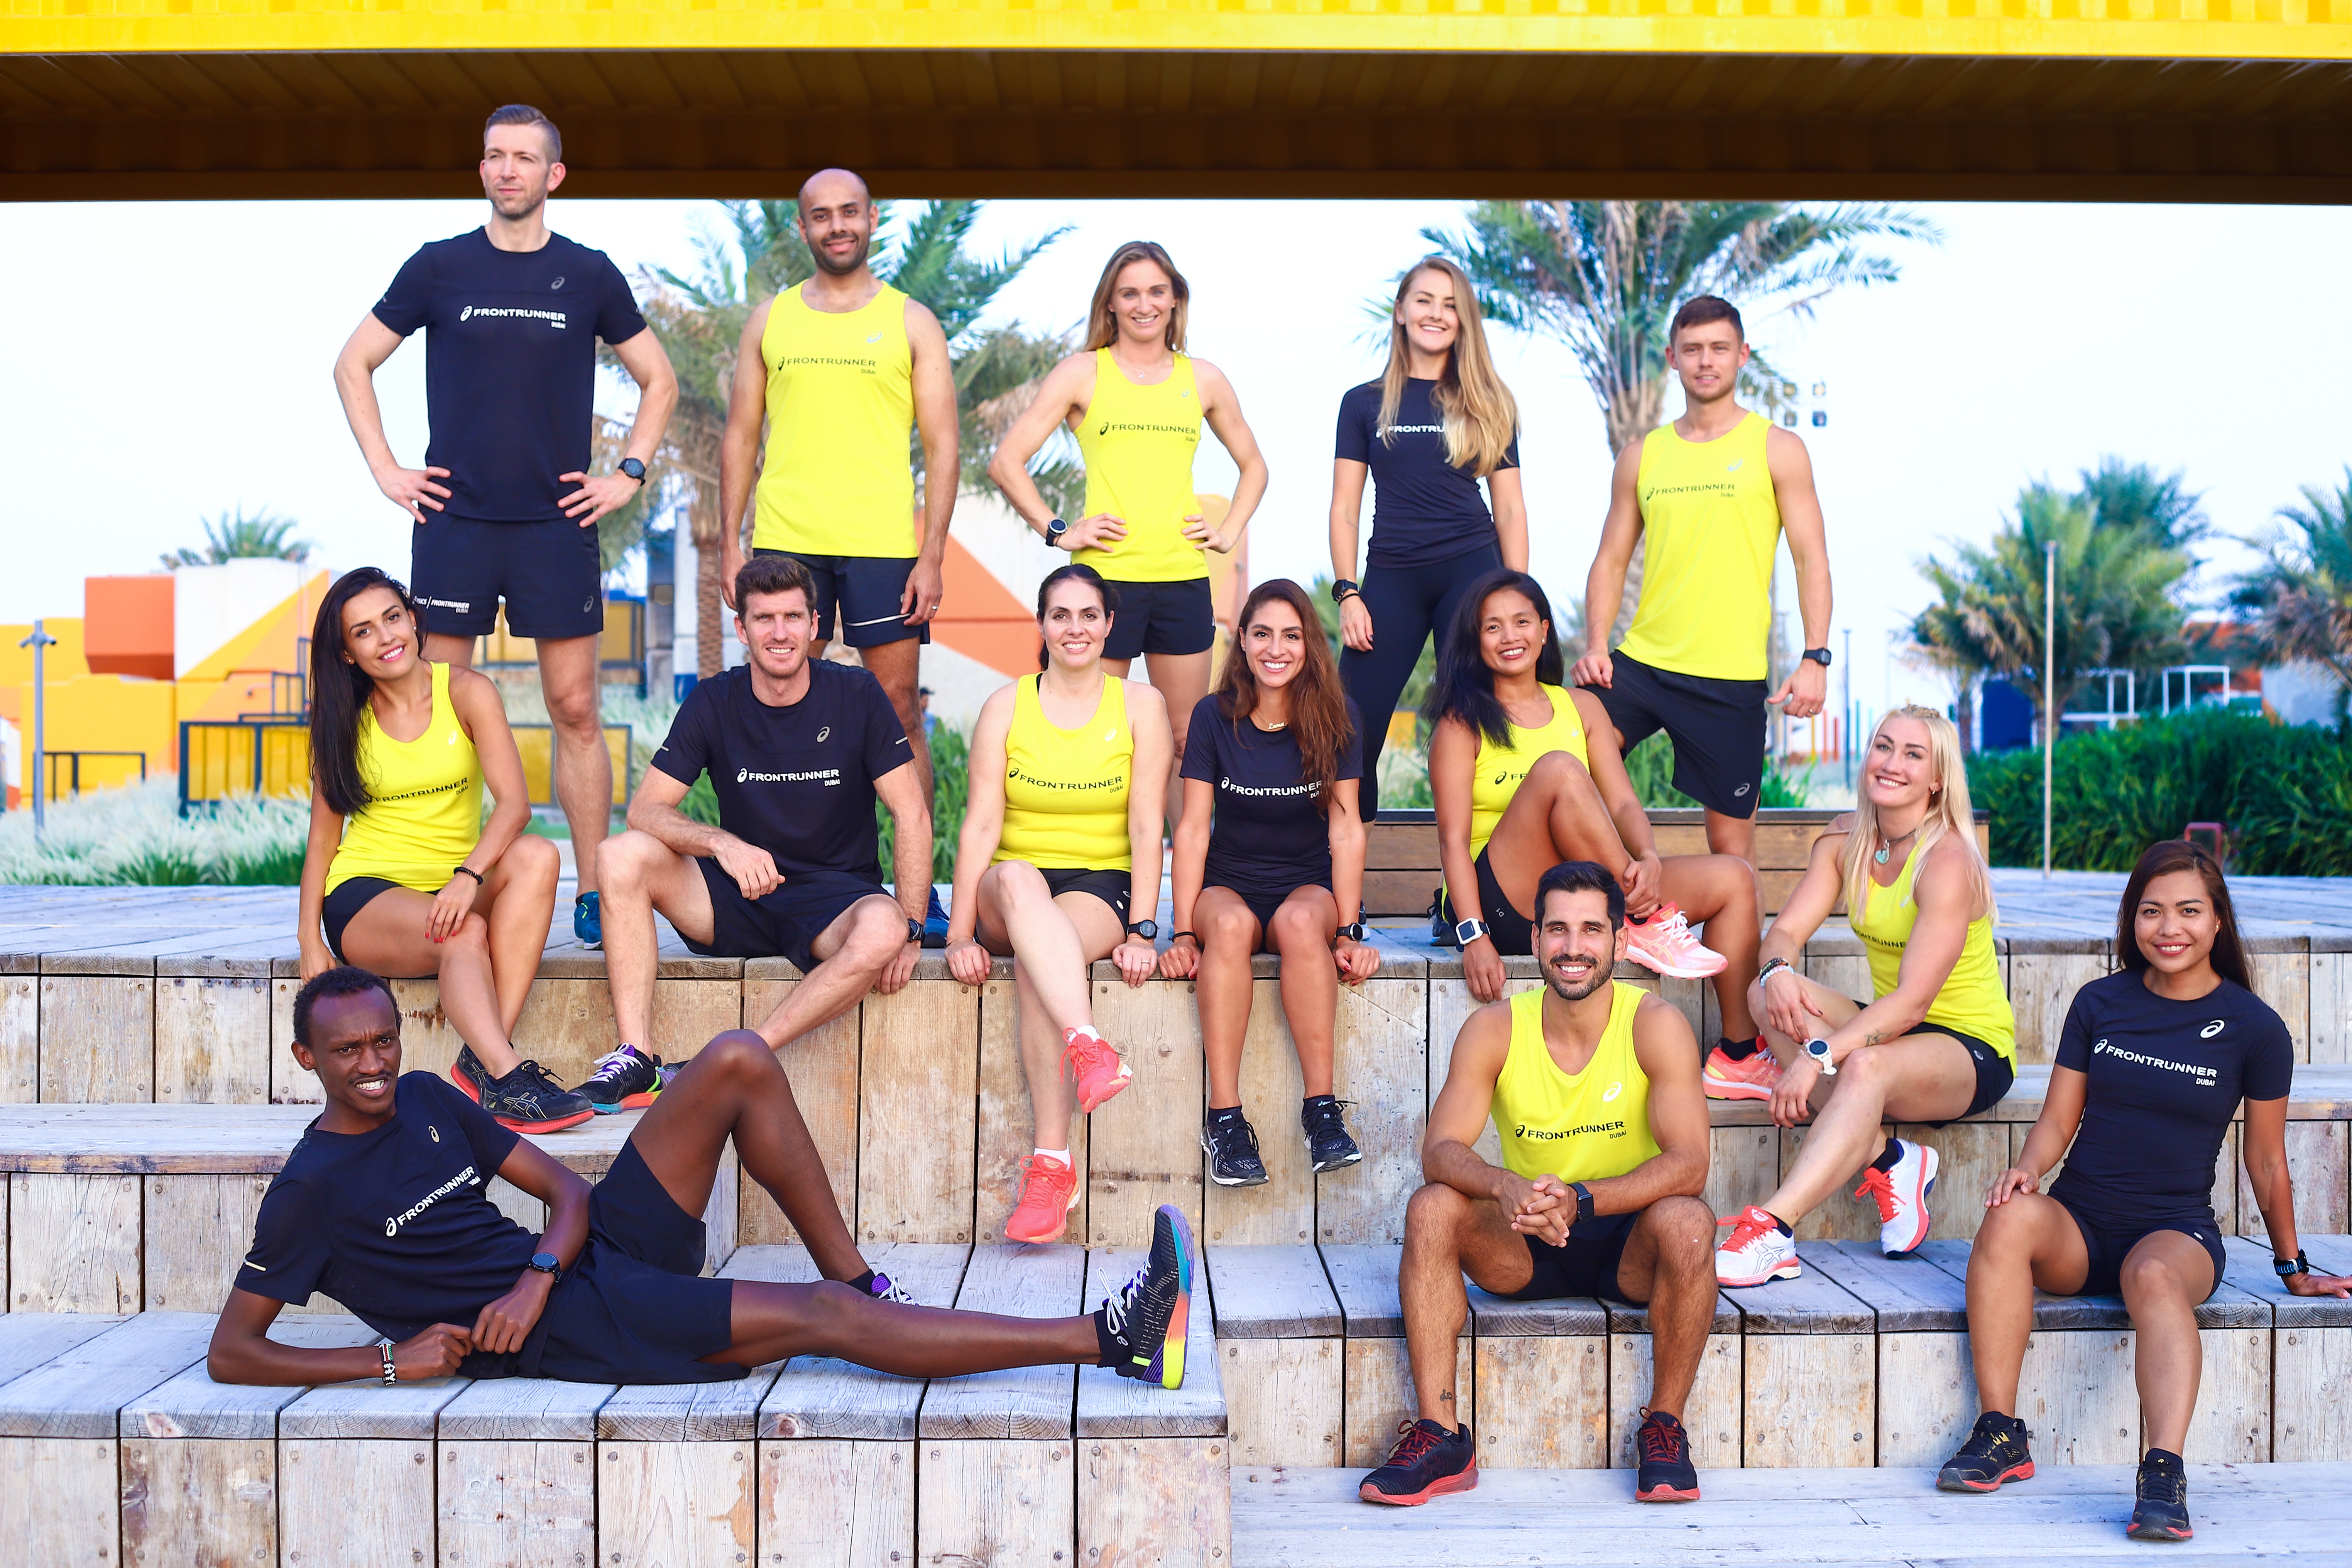 dood Optimistisch Voorverkoop ASICS Frontrunner - MEET THE TEAM AND FIND OUT WHAT WE HAVE INSTALLED FOR  YOU THIS SEASON.